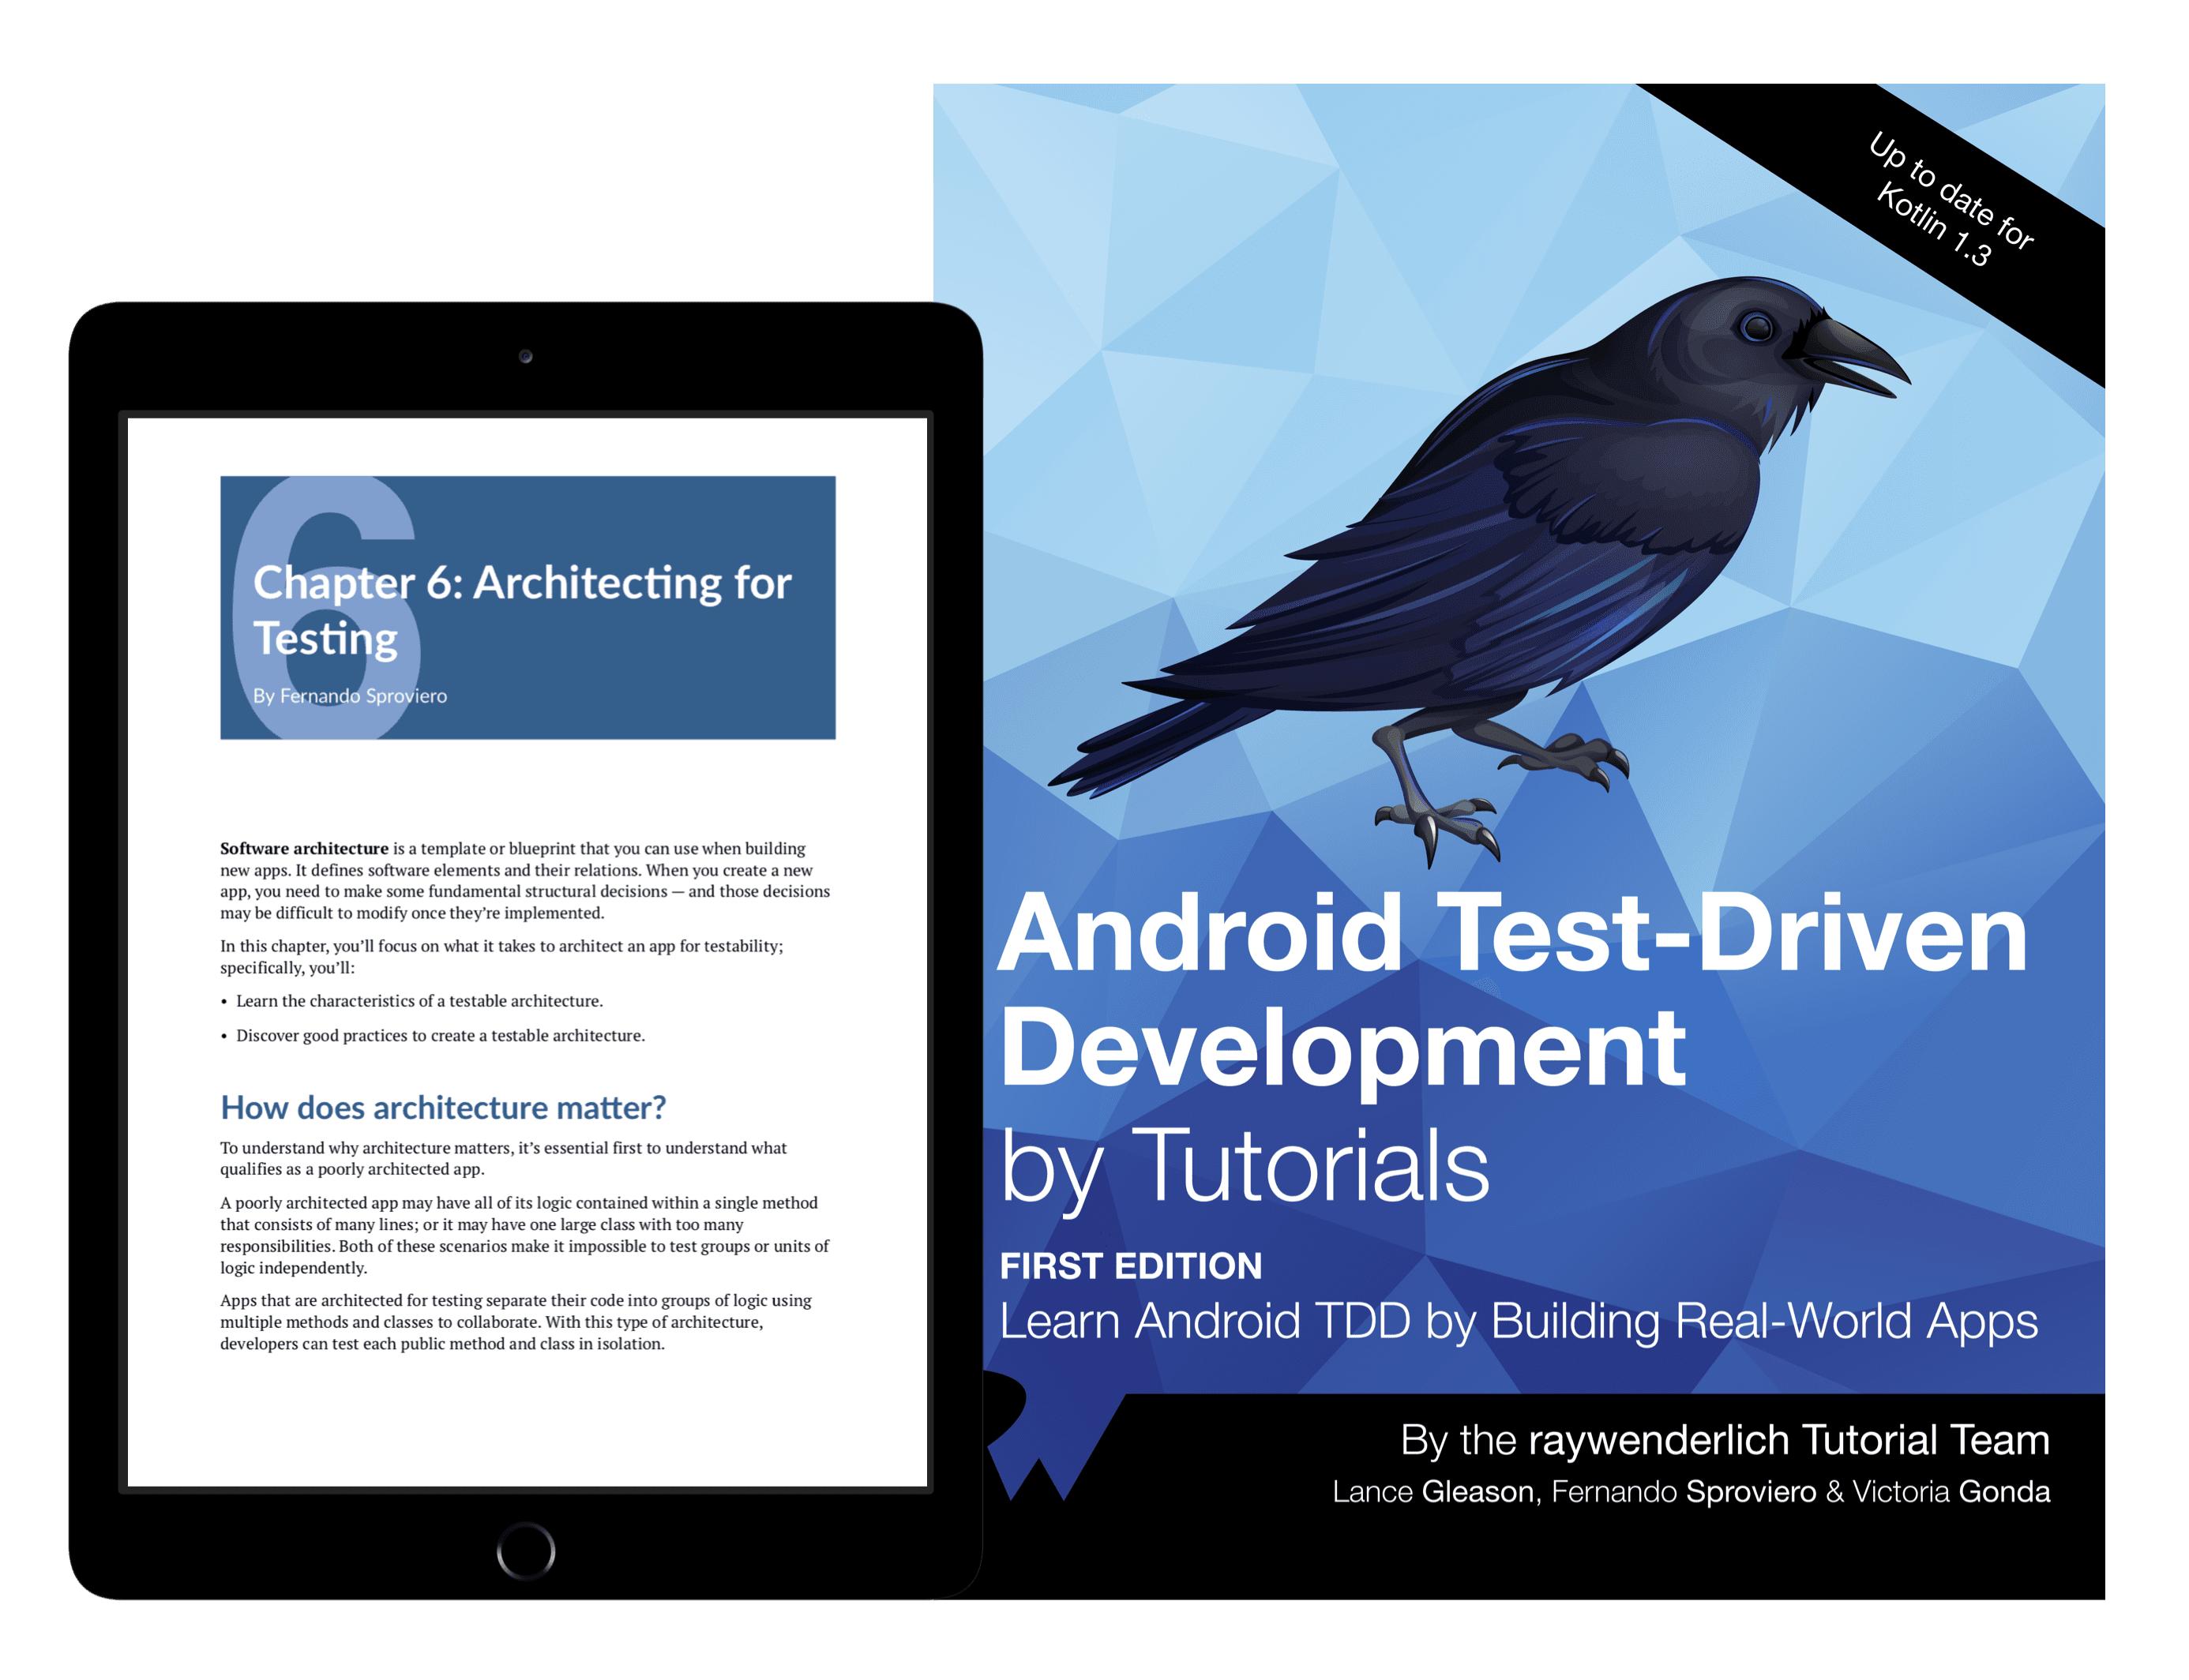 Android Test-Driven Development